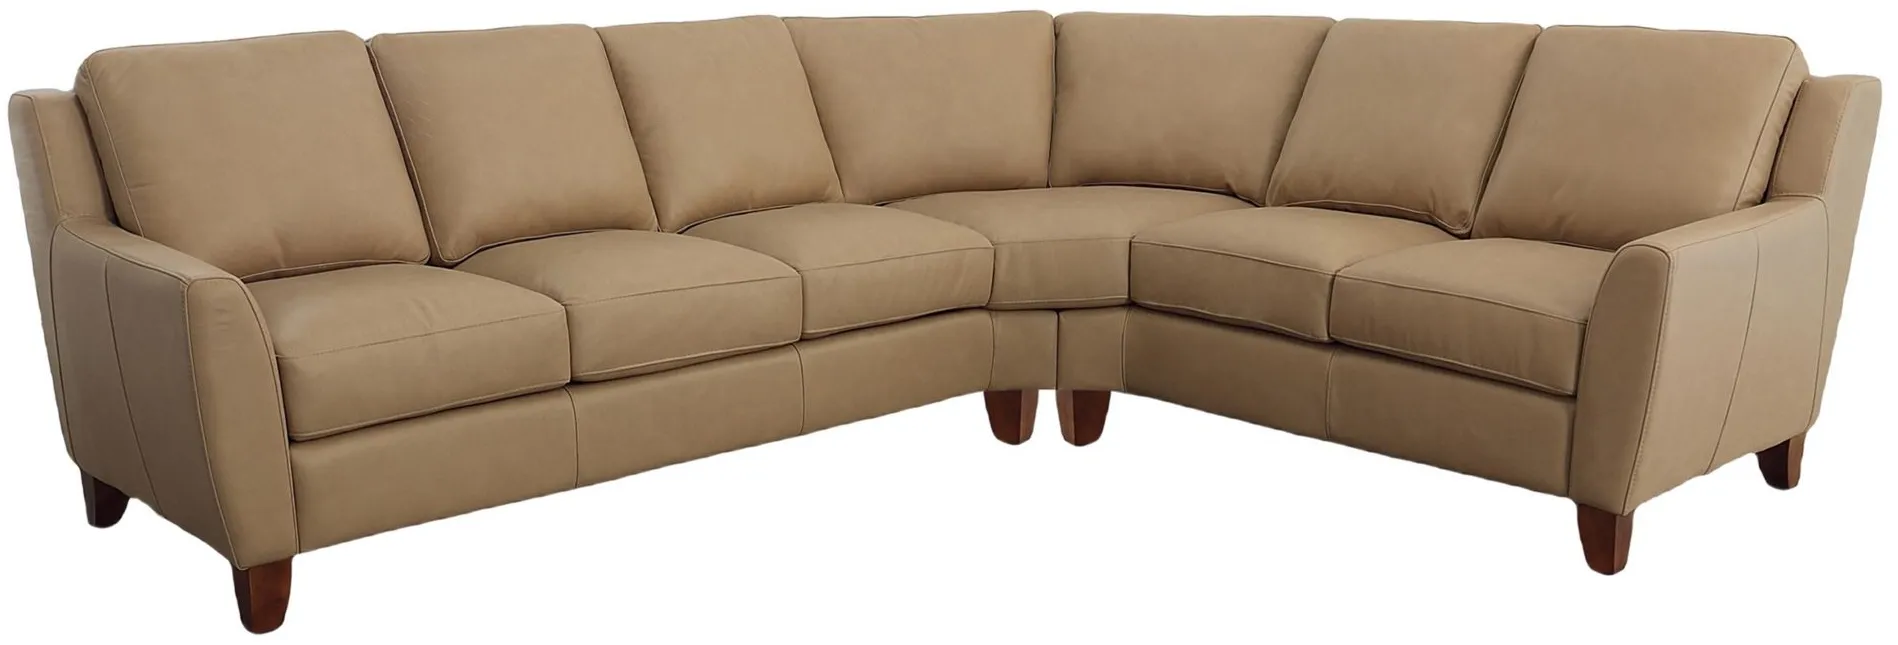 Pavia 2-pc. Sectional in Denver Fawn by Omnia Leather